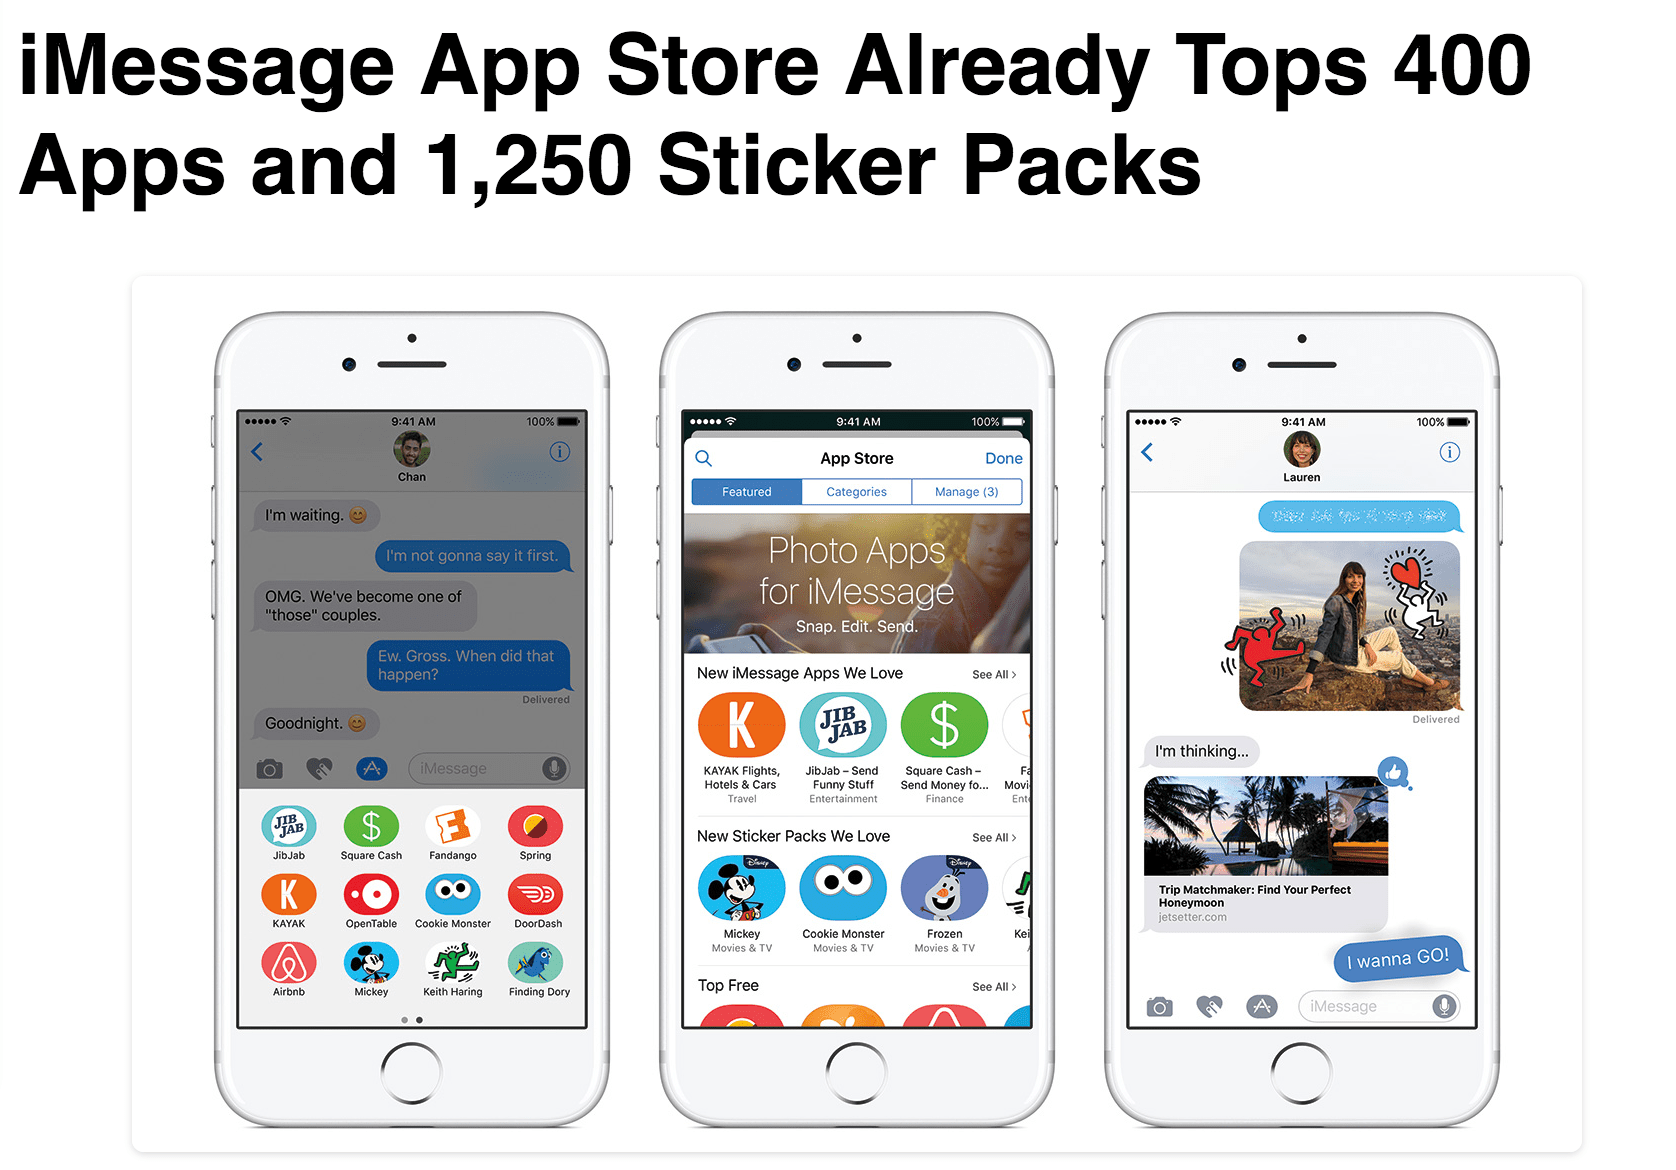 imessage app store already tops 400 apps and 1250 sticker packs